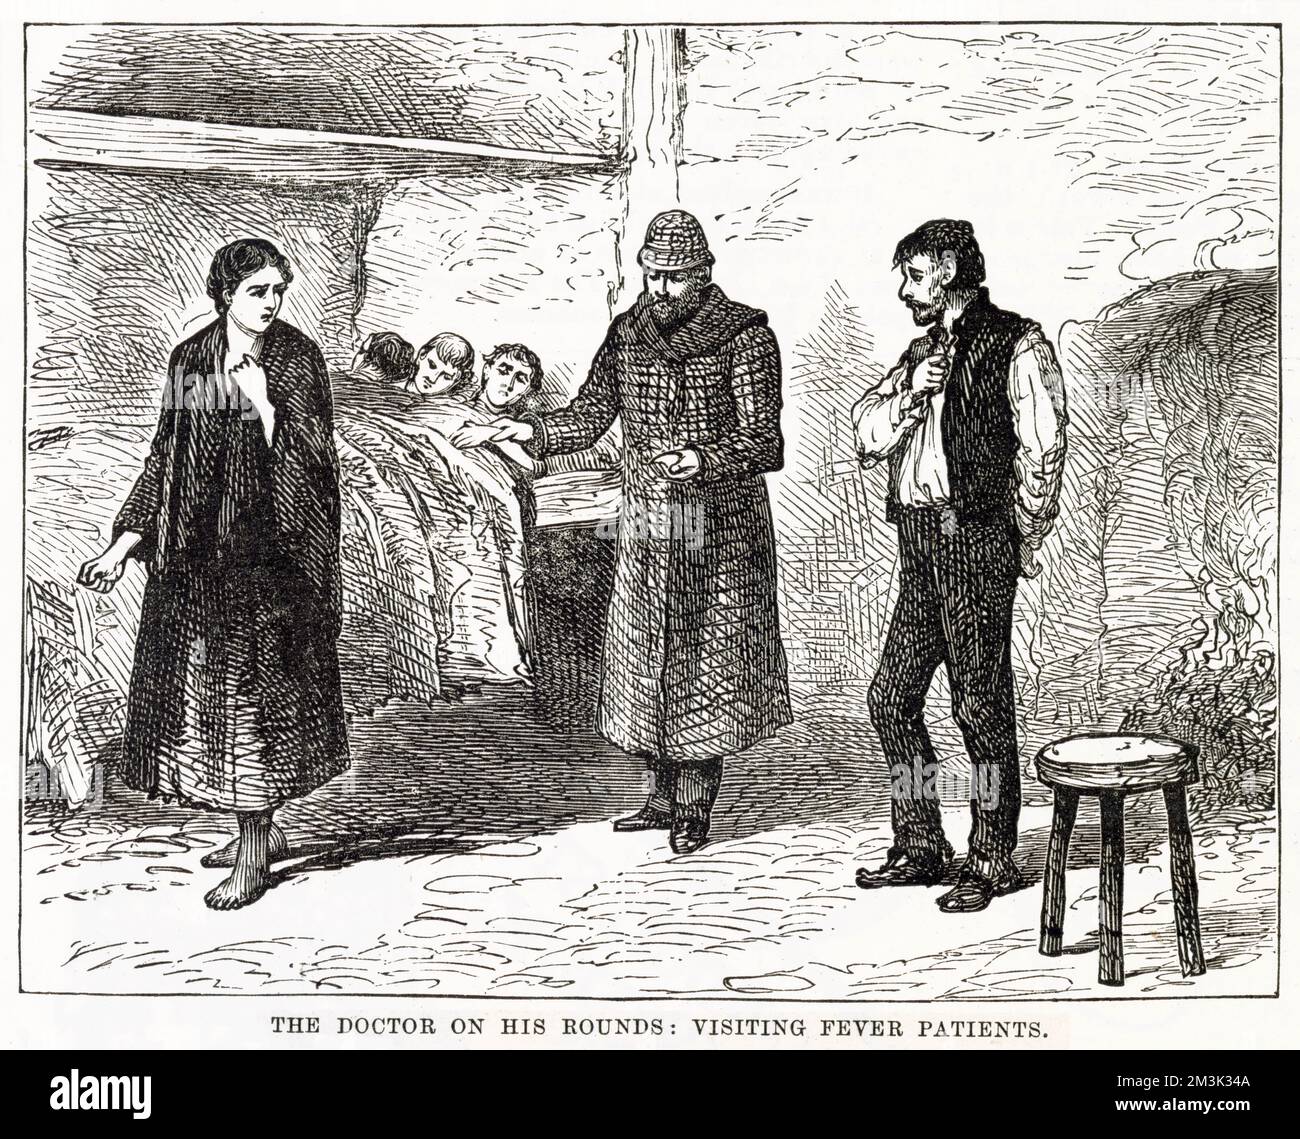 Here a doctor takes the pulse of one of three patients in the same bed. A man and woman look on with worry and fear. Hunger and disease were the backdrop to the outbreak of fever. These miserable conditions were brought on by the potato famine in the mid 19th century and further compounded by the forced evictions of poverty-stricken peasants from their homes and farms. Stock Photo